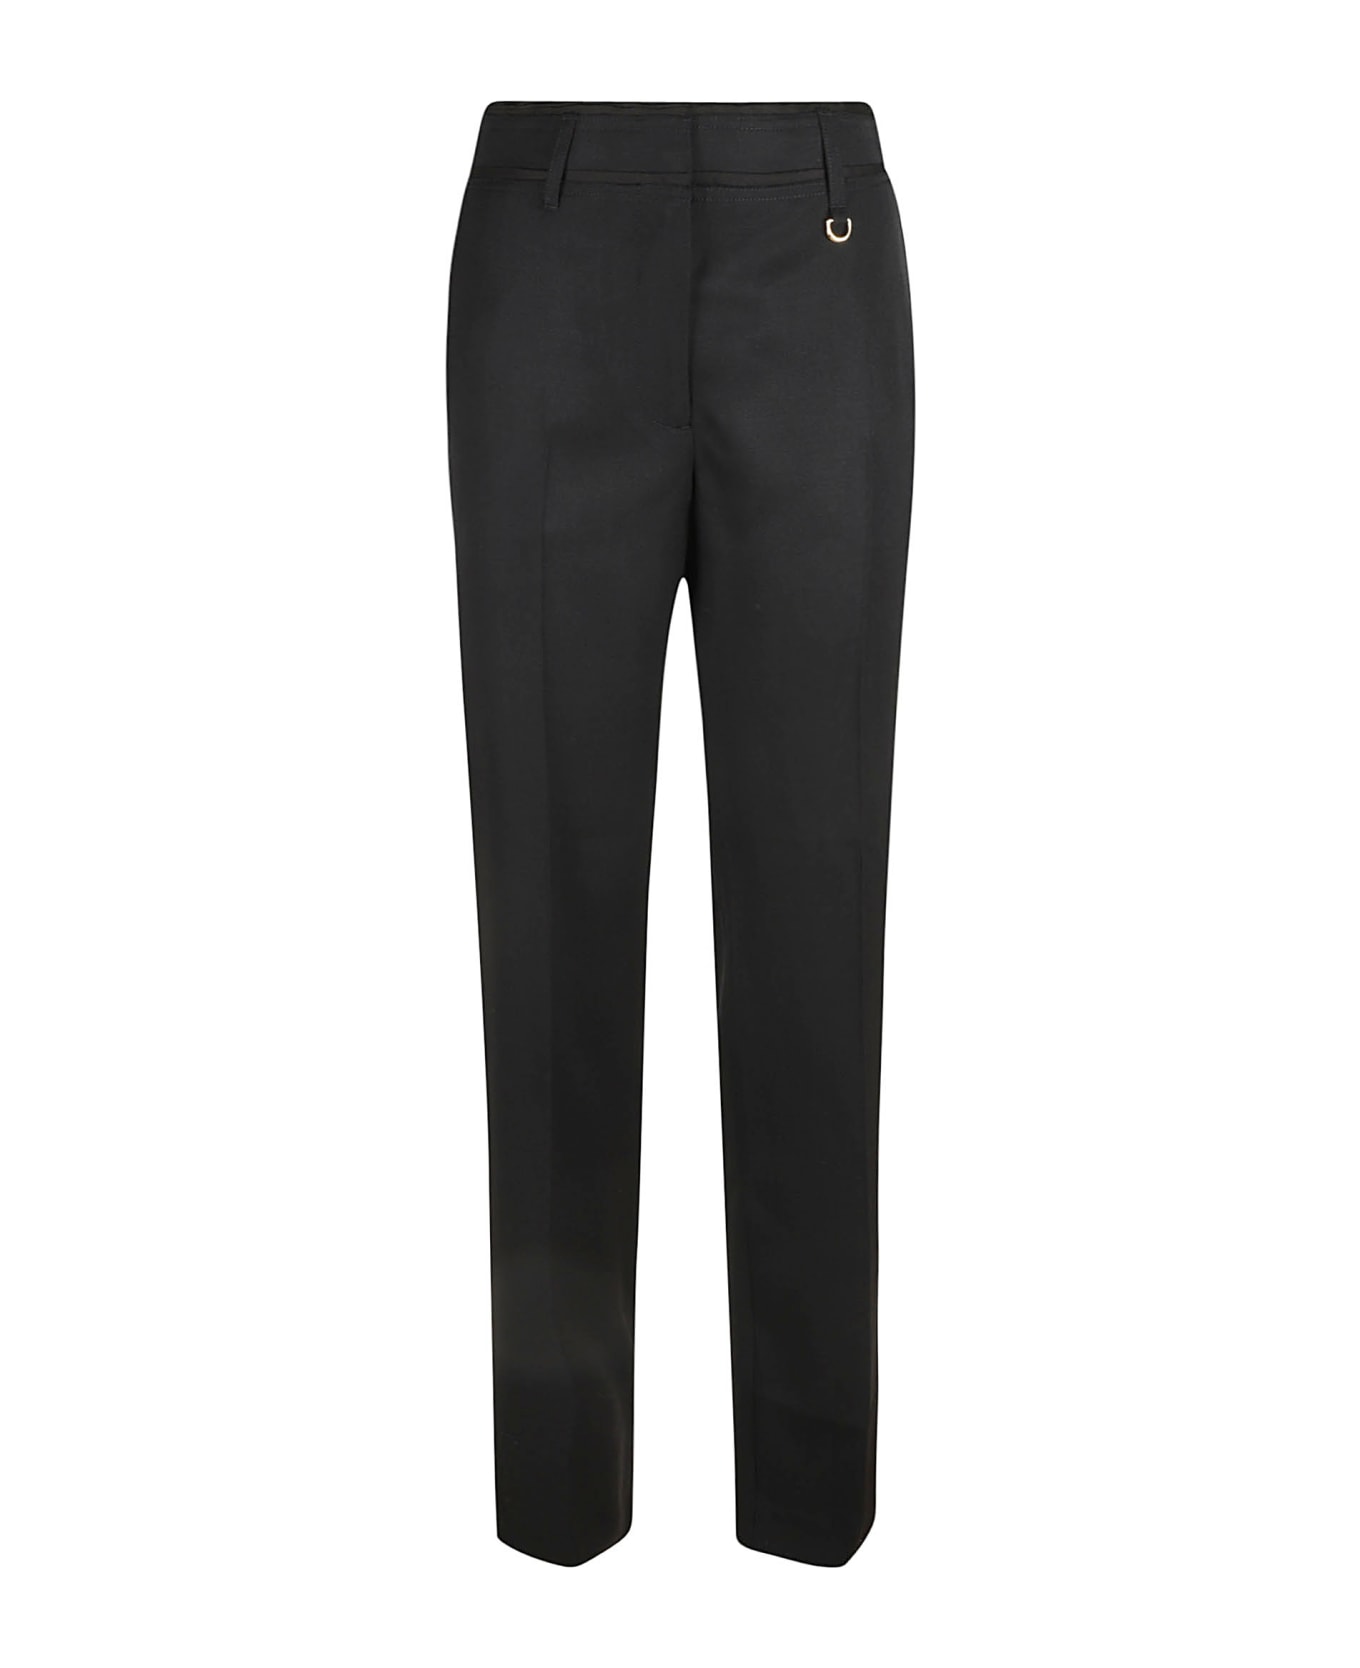 Jacquemus Ficelle Wool Trousers - Black ボトムス